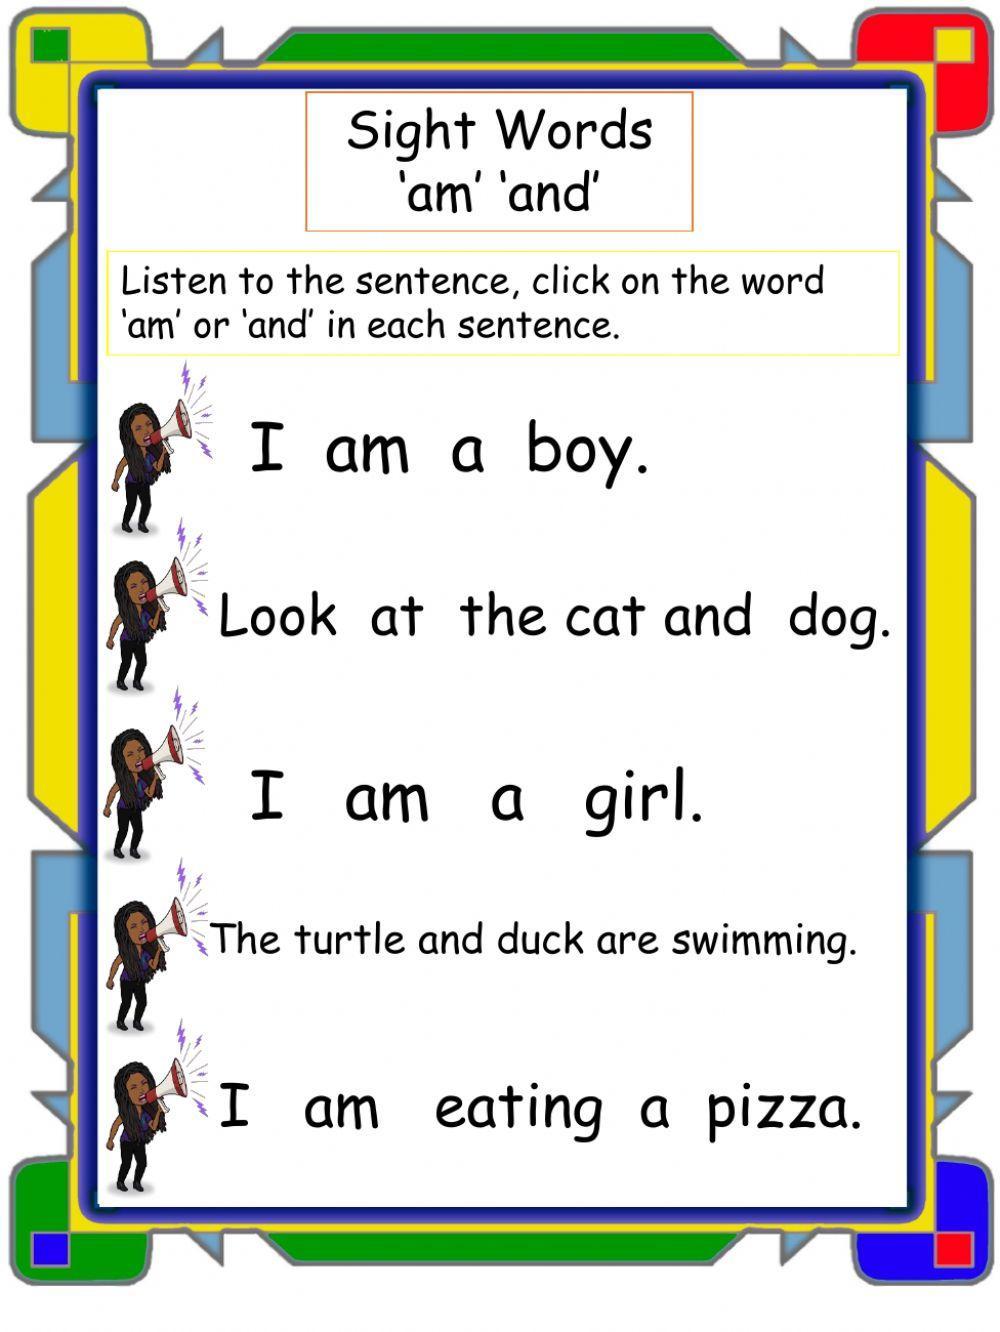 Sight words am and